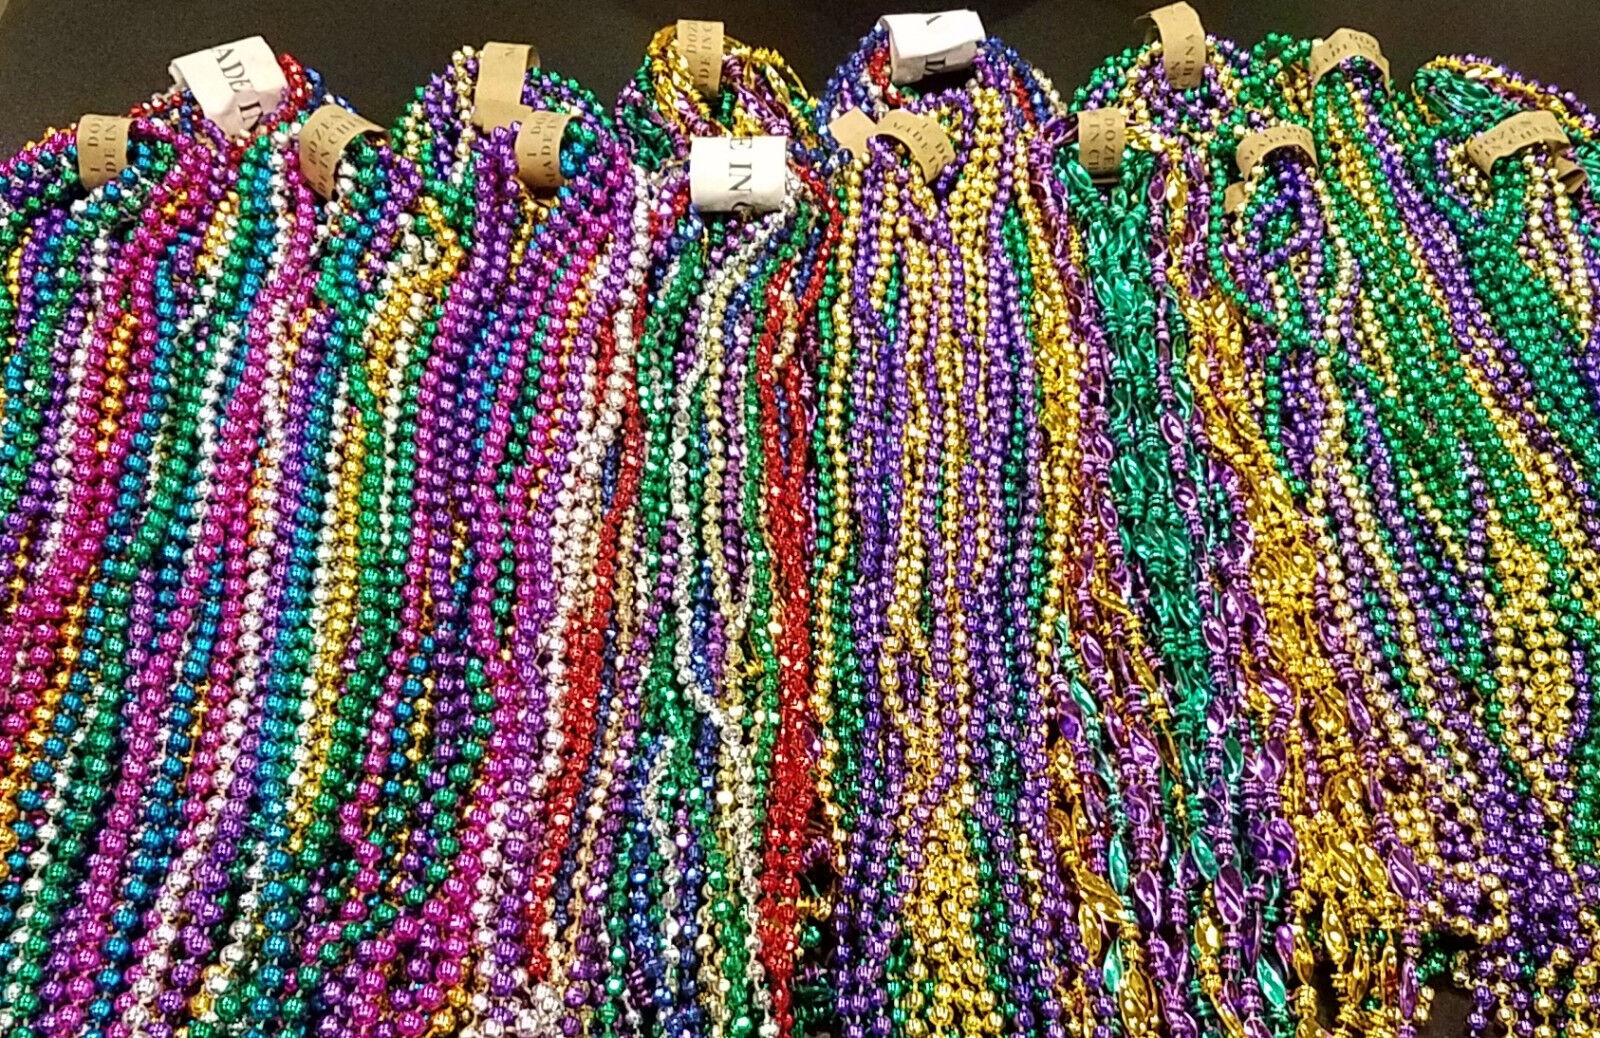 72 Authentic New Orleans Carnival Parade Throws Mardi Gras Beads Necklaces 6 doz